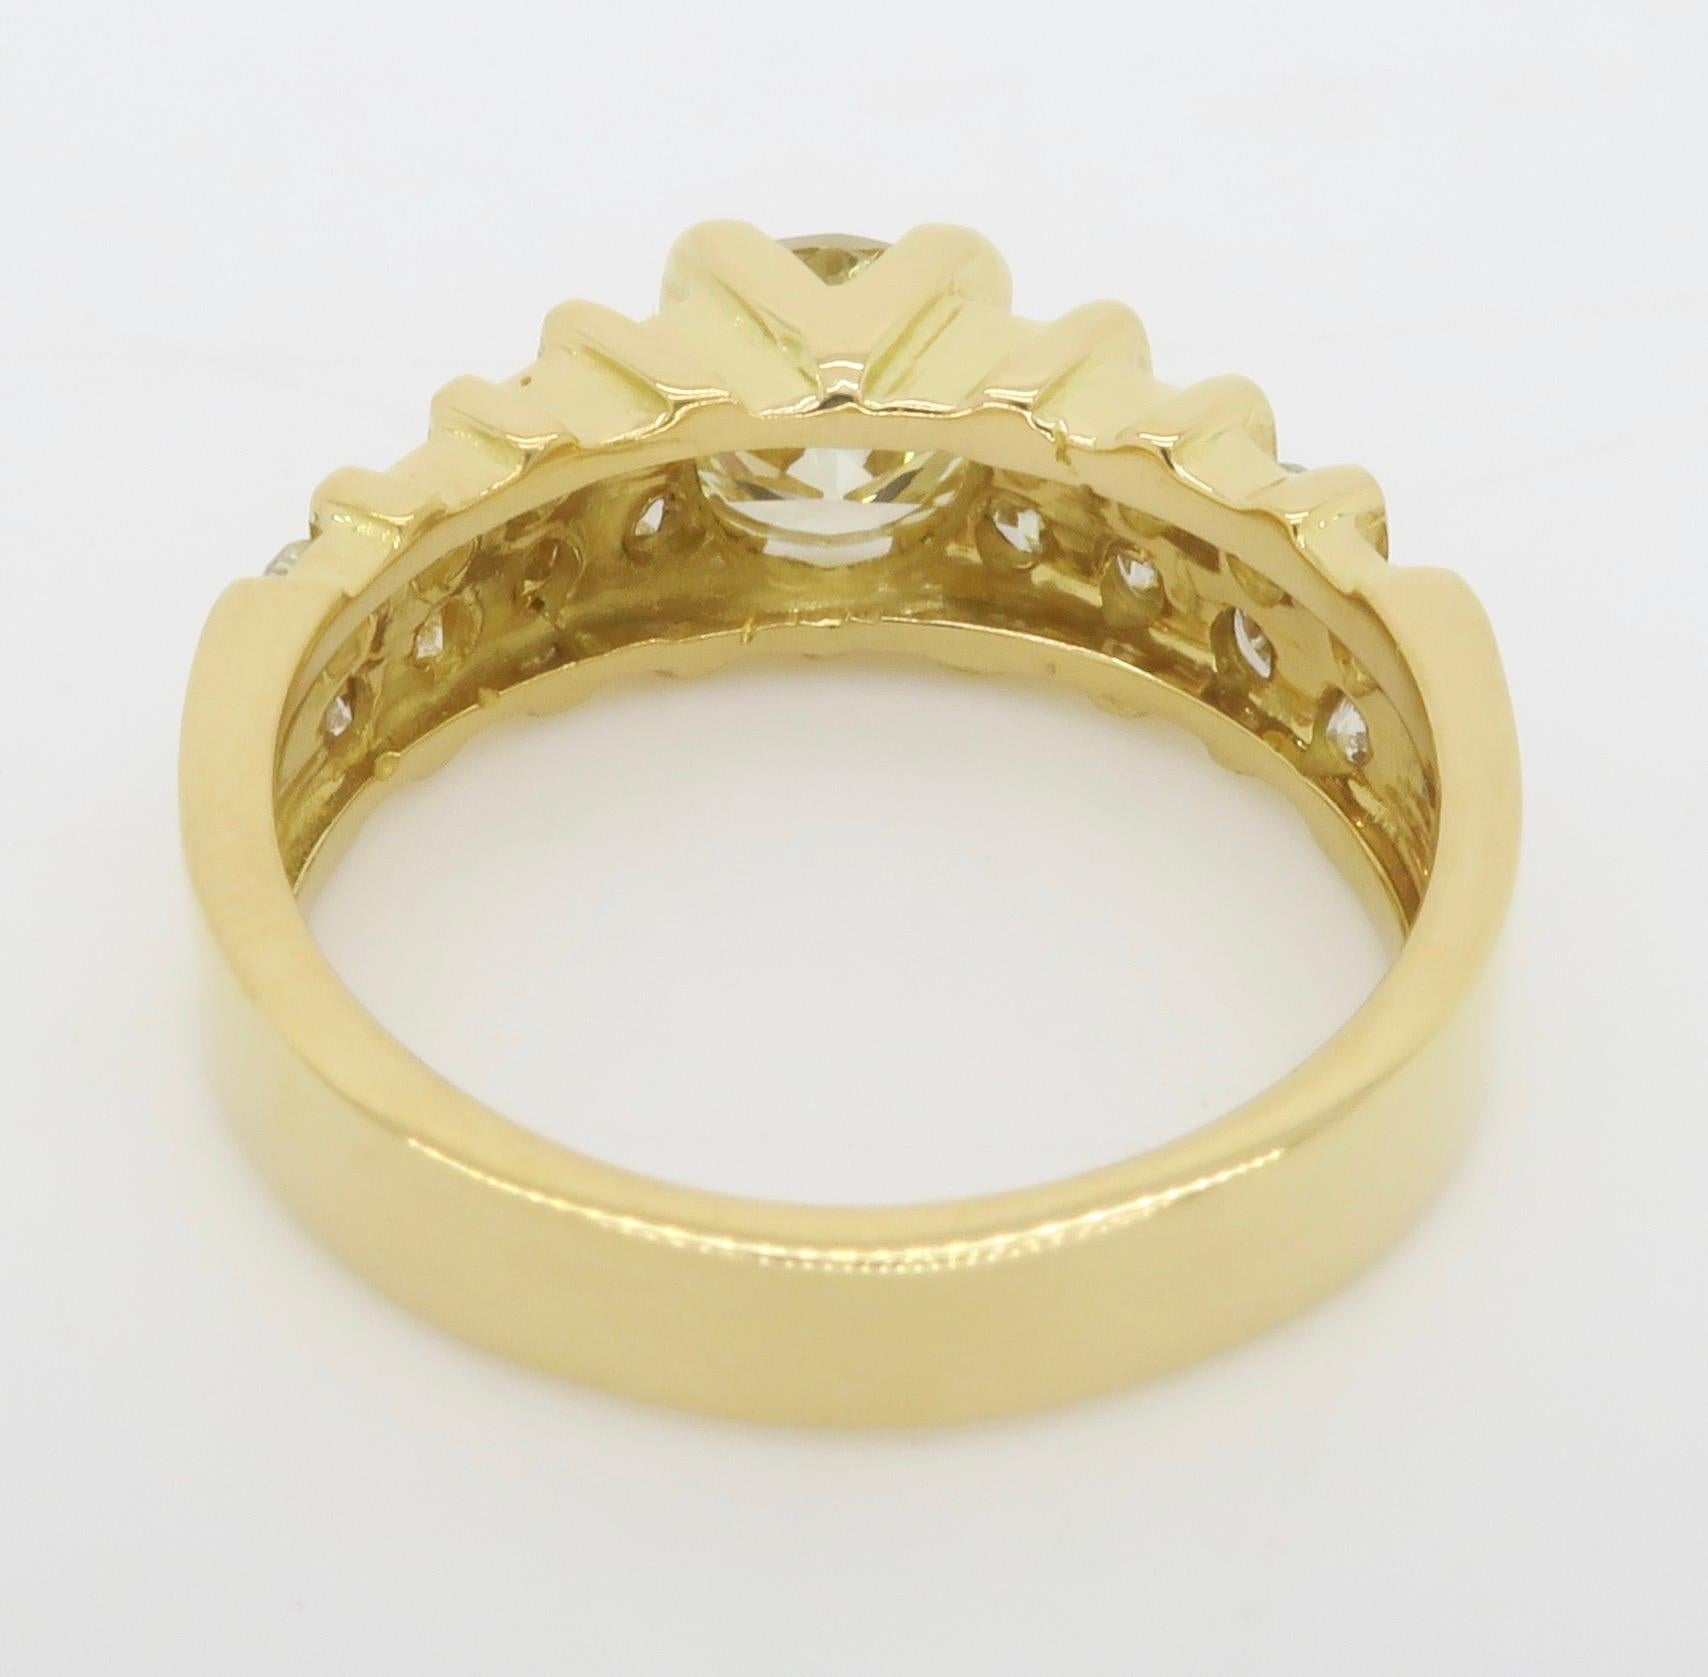 1.54ctw Diamond Encrusted Ring in 14k Yellow Gold For Sale 2